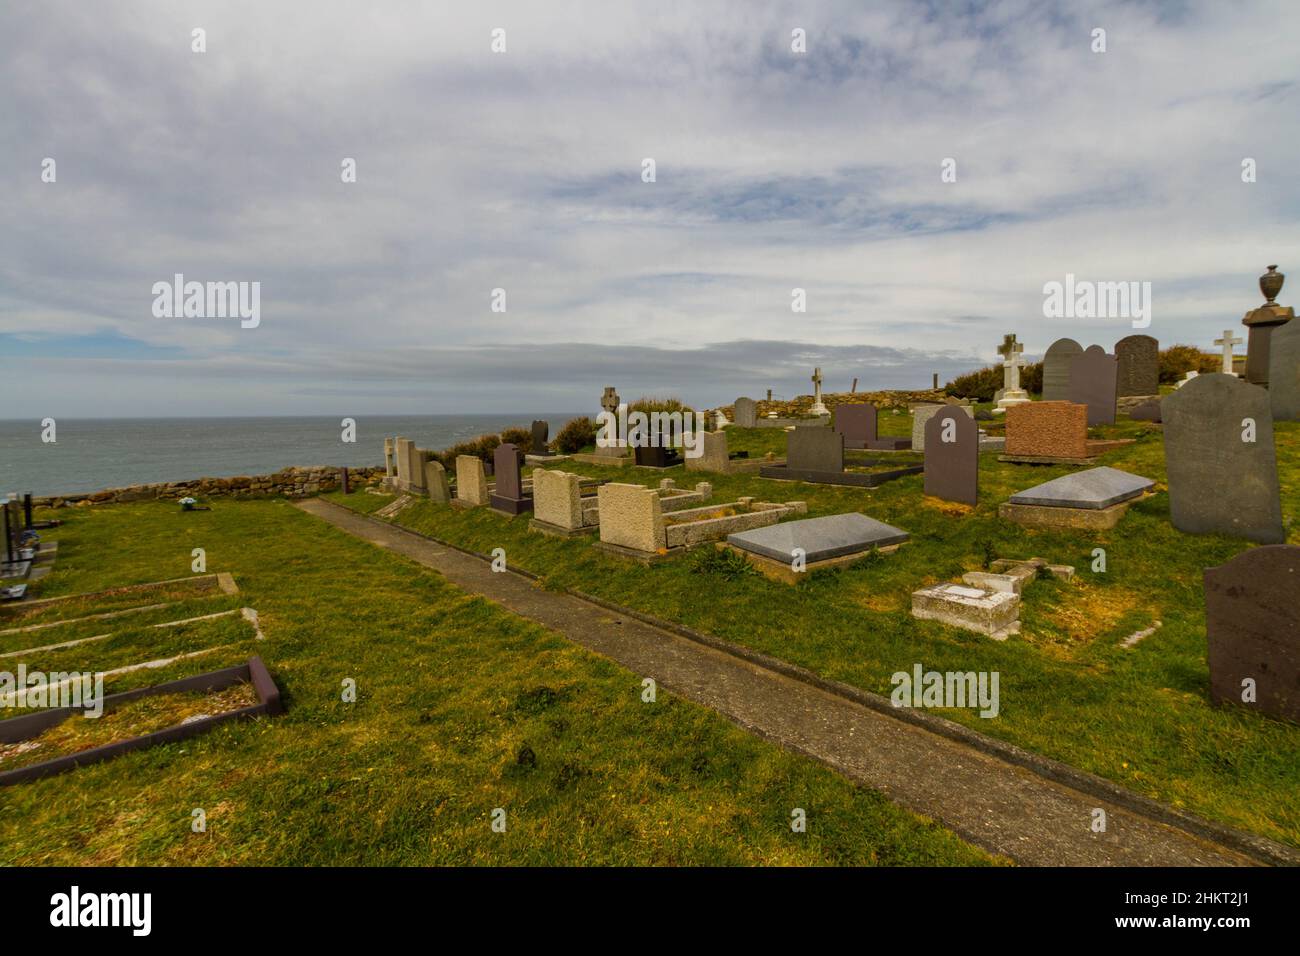 Back of gravestones on clifftop cemetery, sea in background Stock Photo